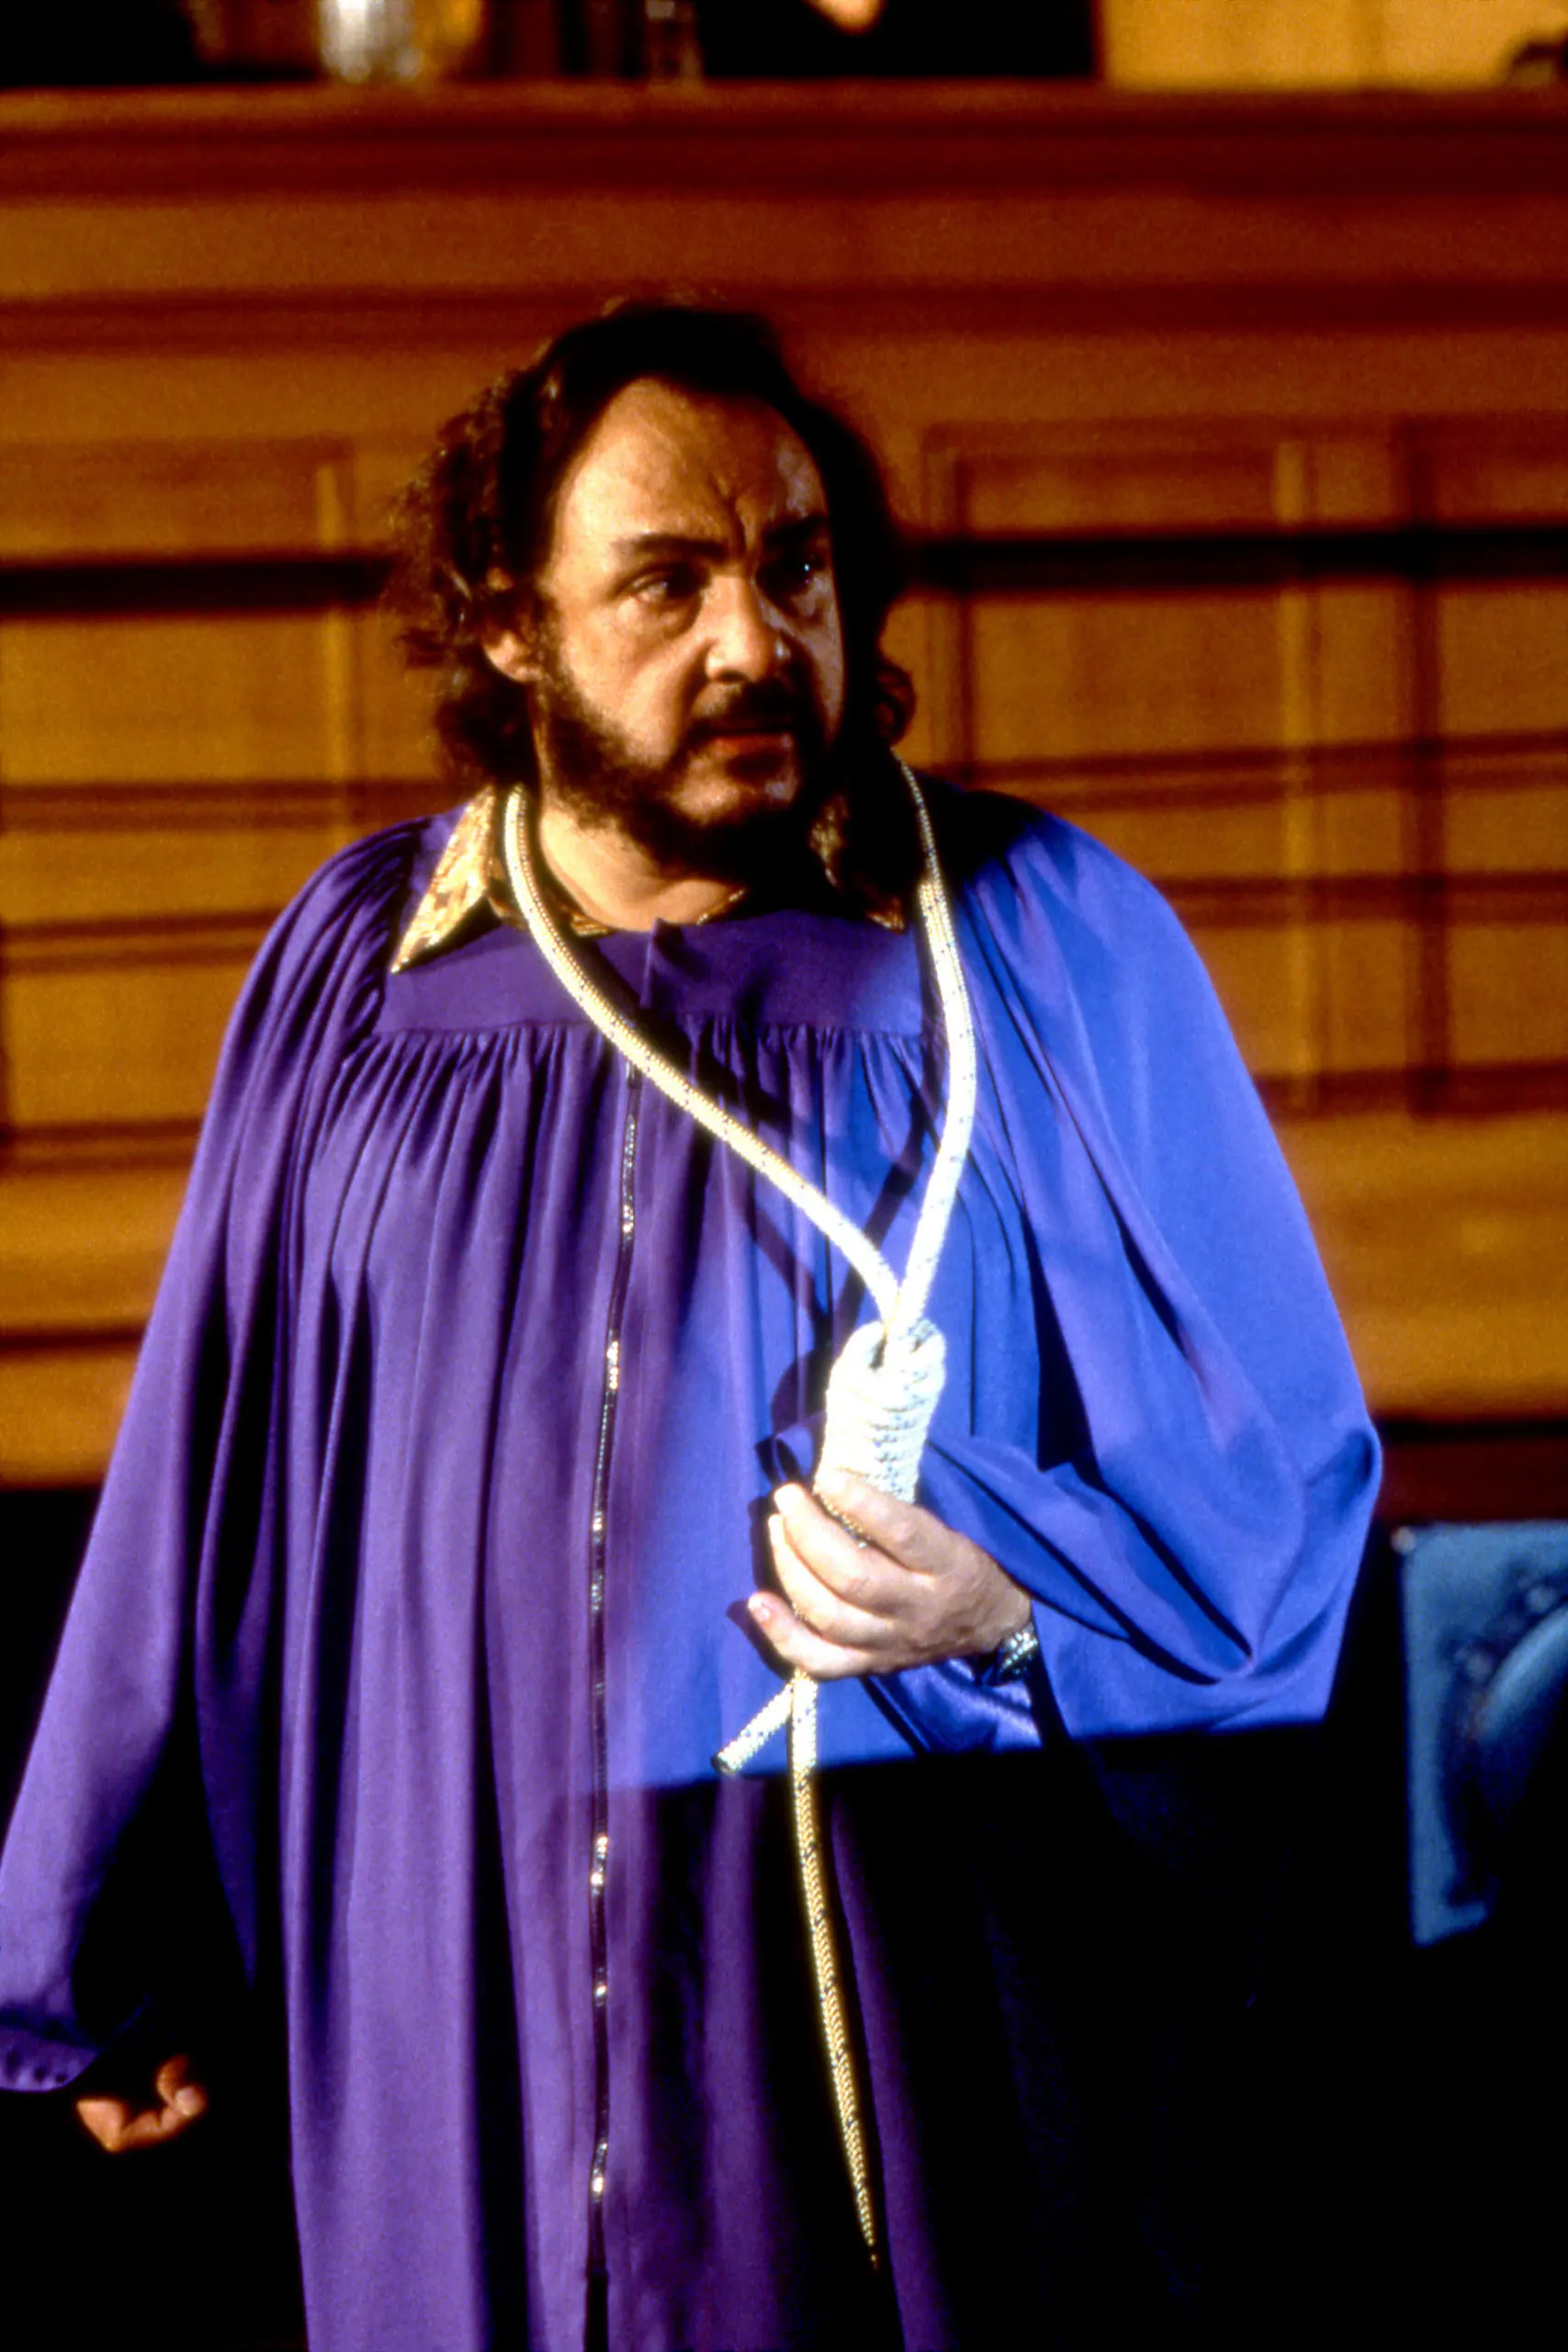 Professor Arturo with a rope around his neck from the episode Dead Man Sliding